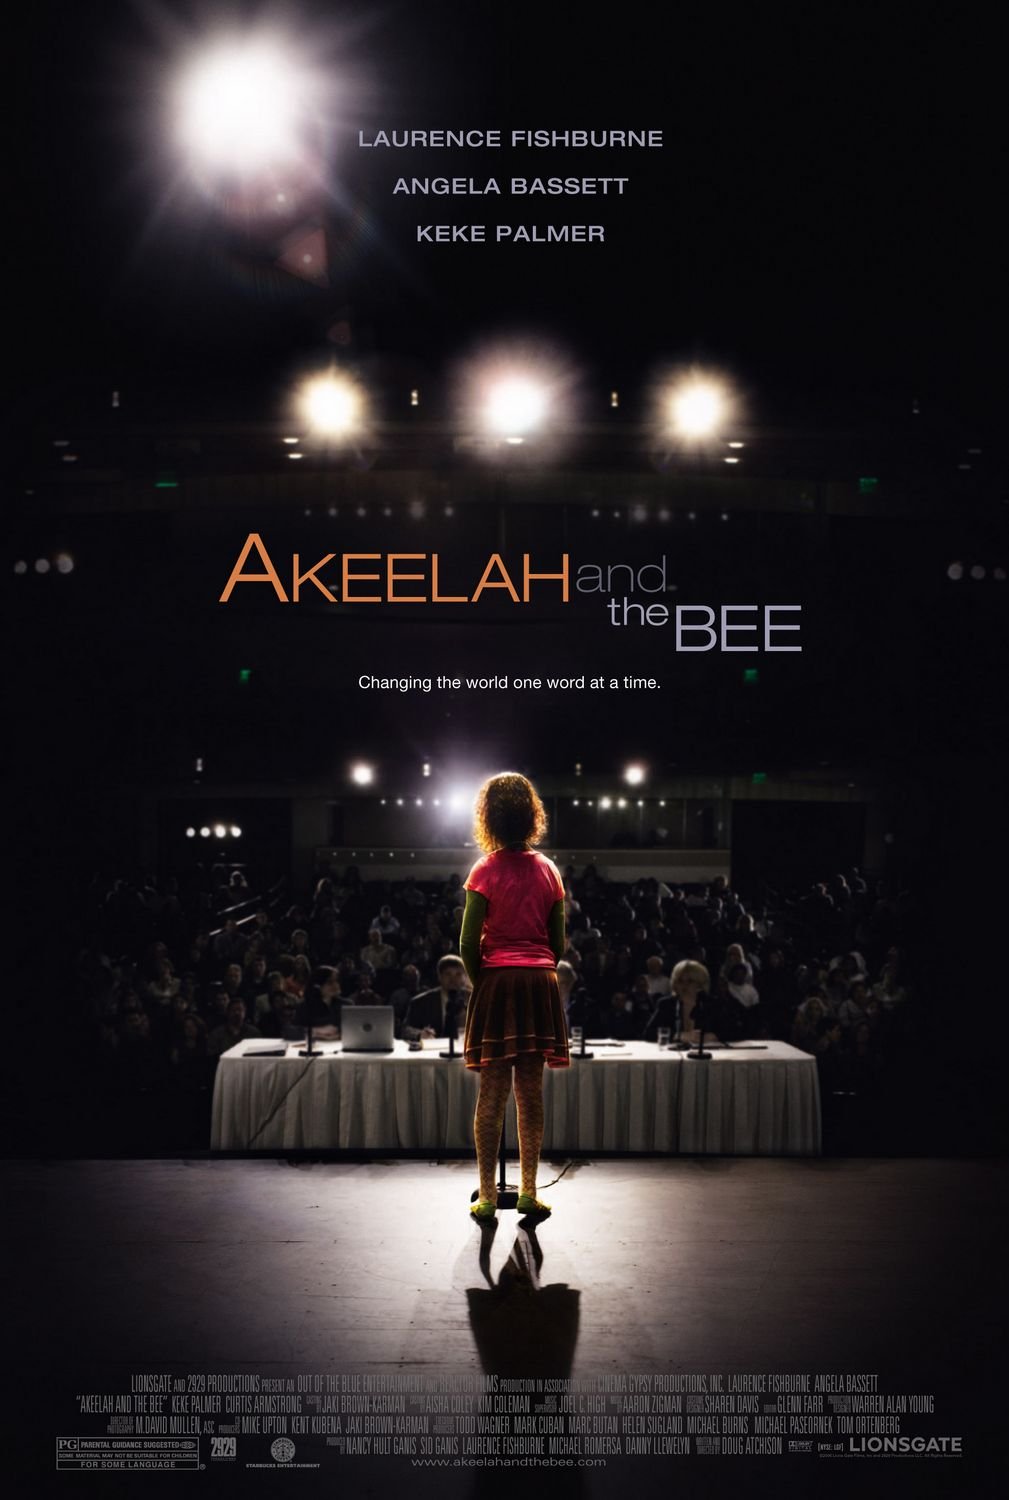 L'affiche du film Akeelah and the Bee